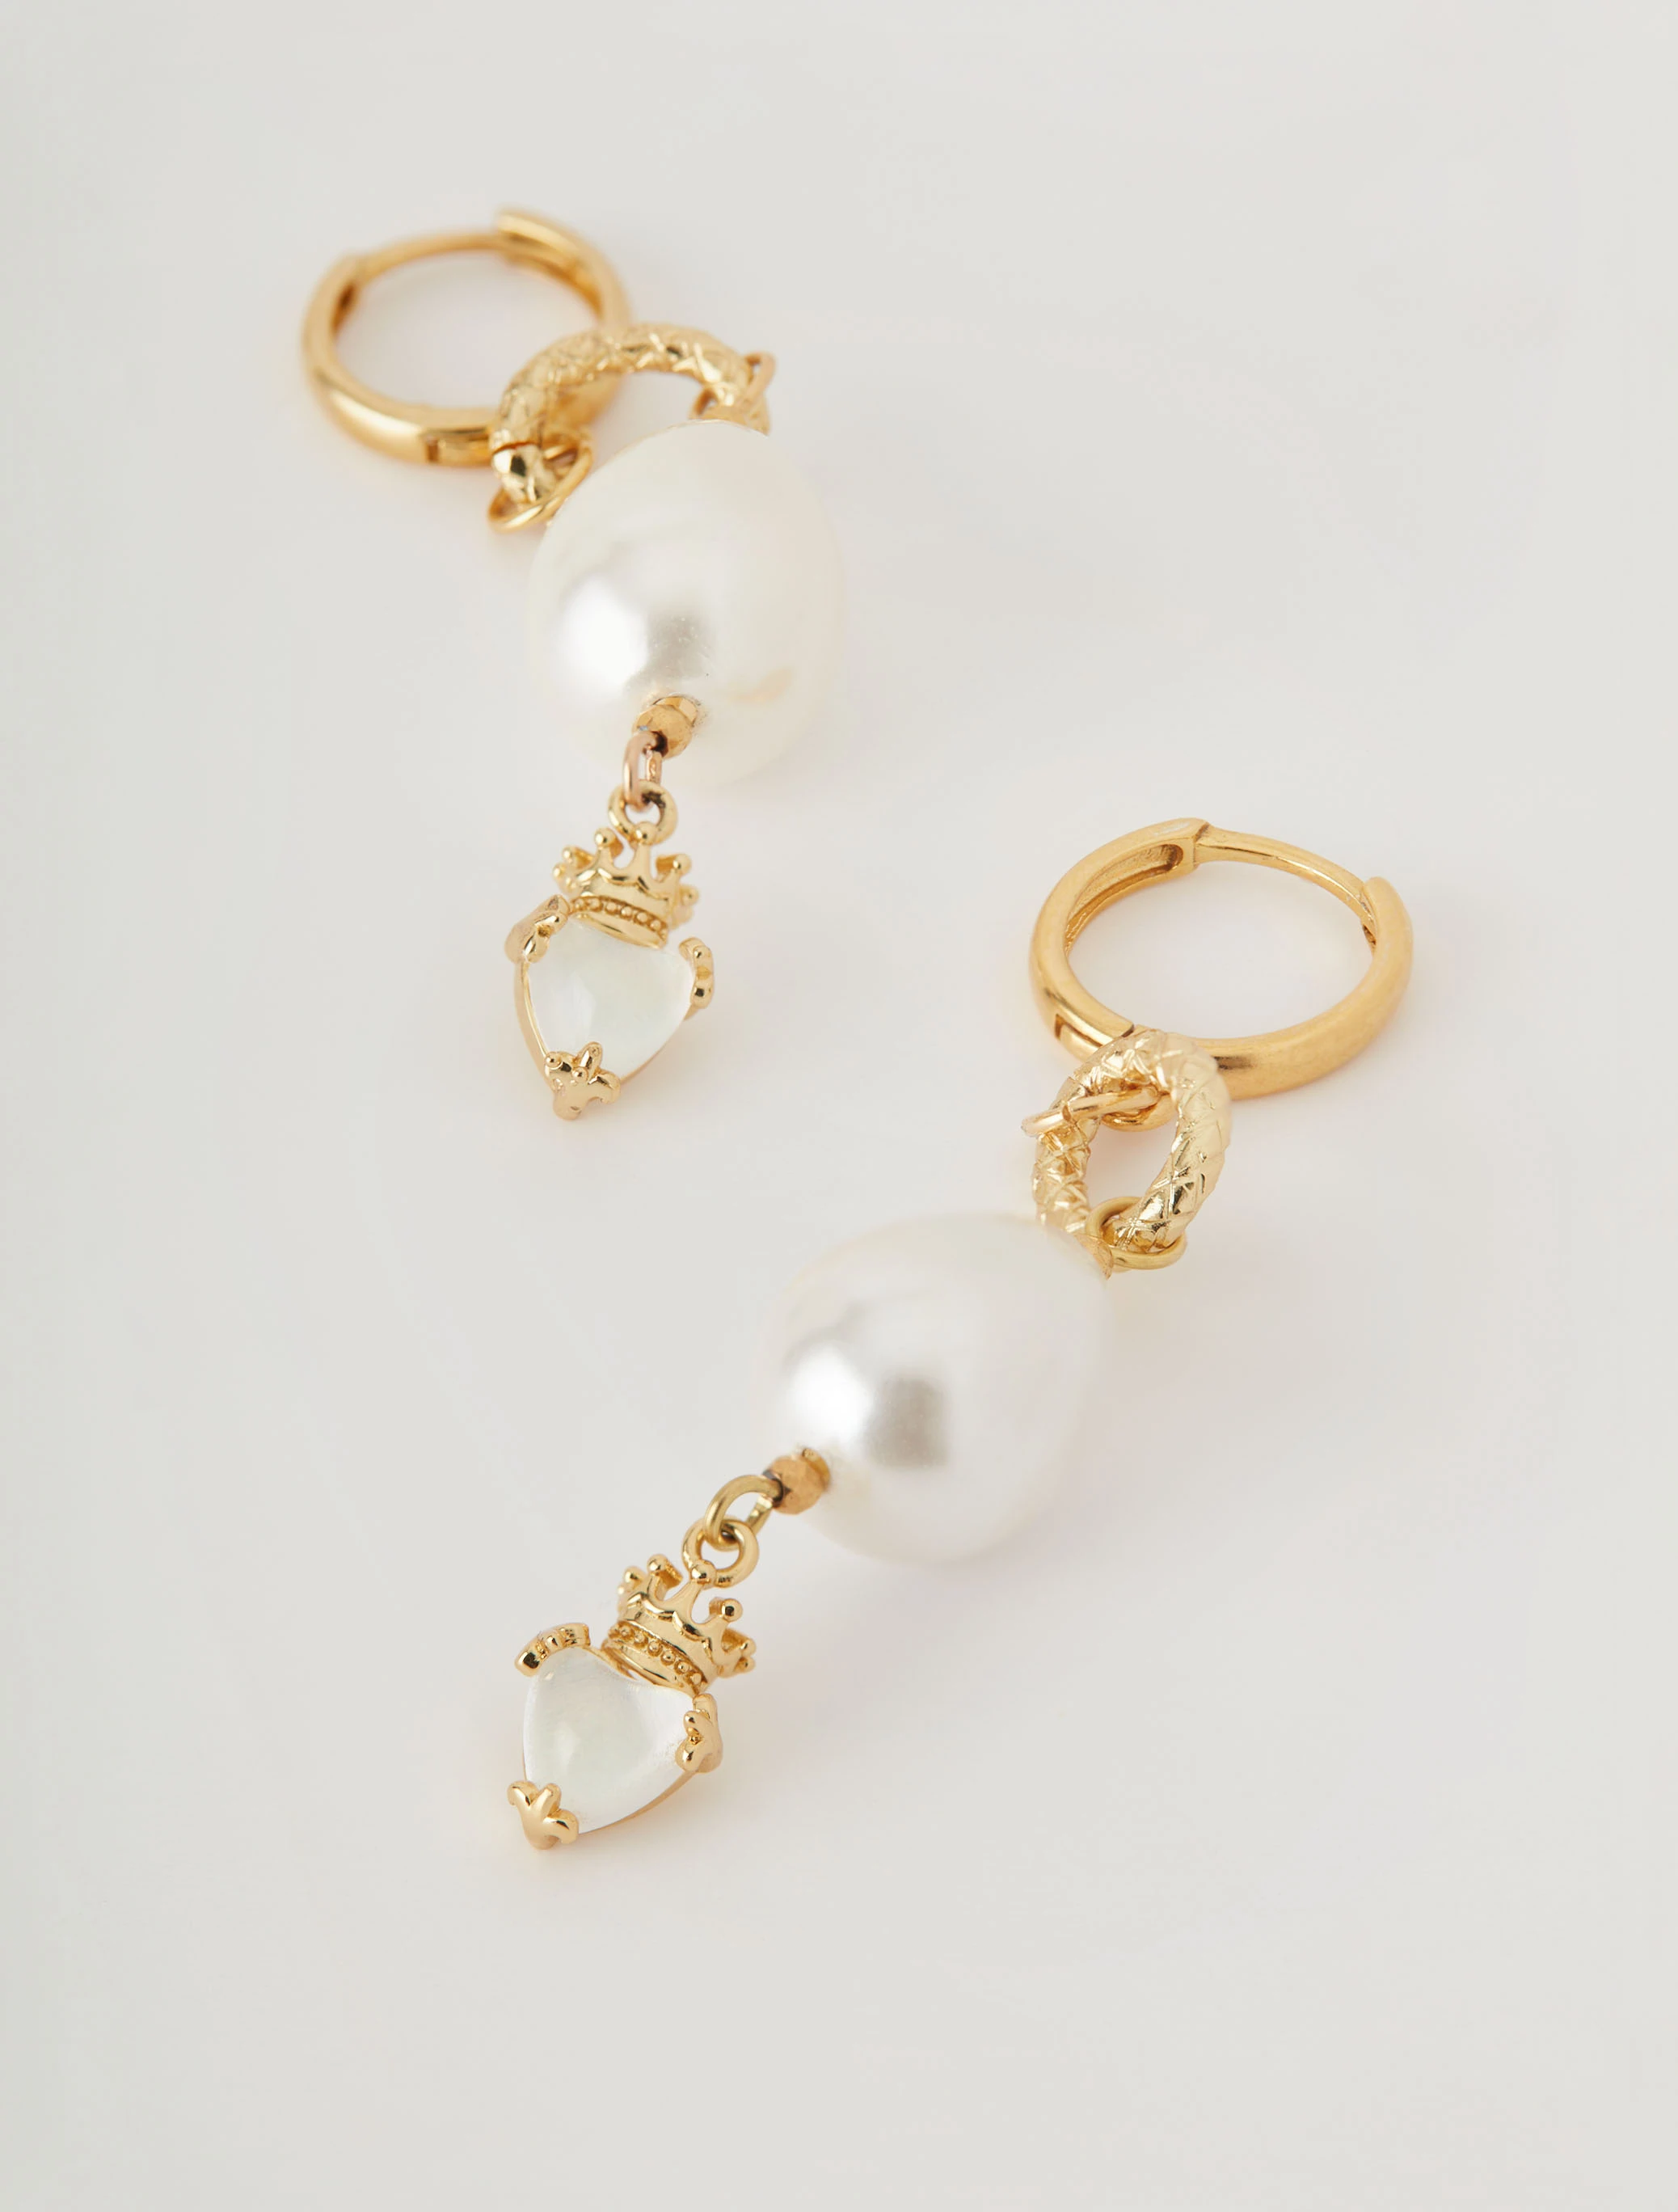 Long earrings with natural pearls